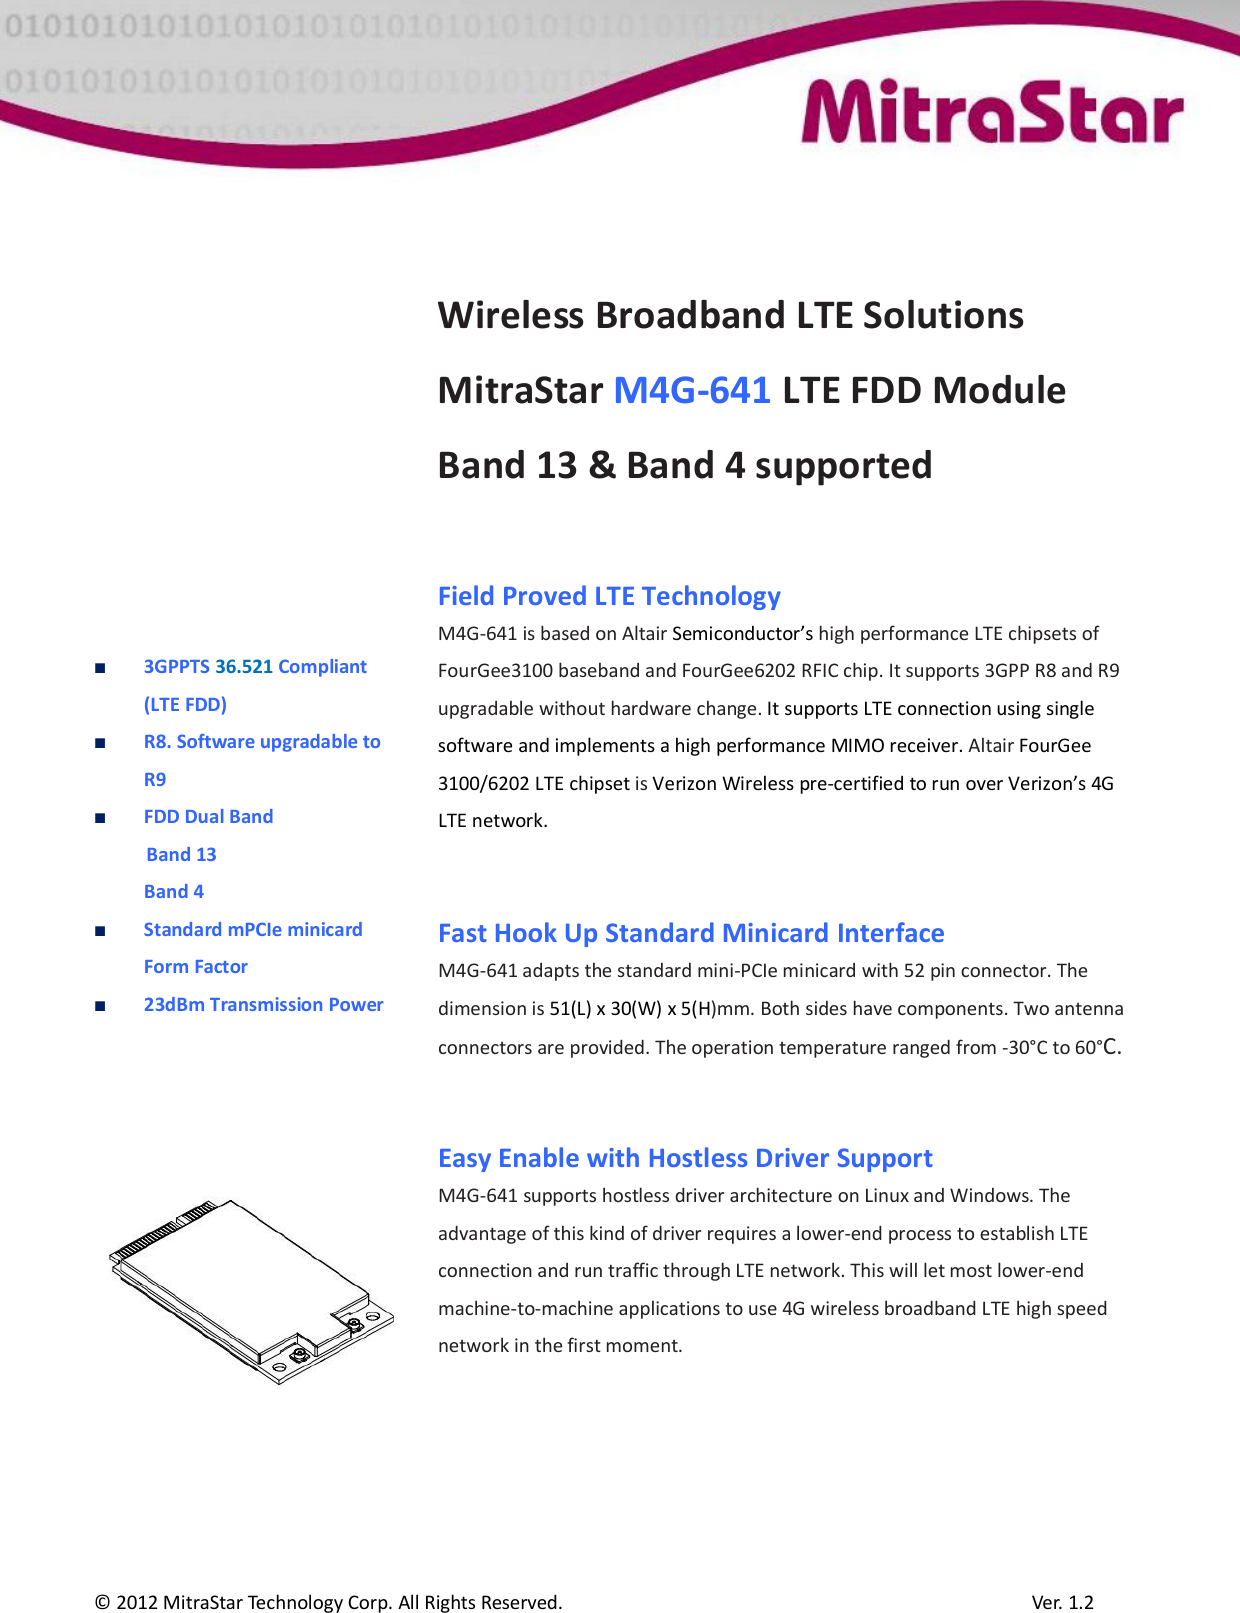  © 2012 MitraStar Technology Corp. All Rights Reserved.                                              Ver. 1.2               3GPPTS 36.521 Compliant (LTE FDD)  R8. Software upgradable to R9  FDD Dual Band Band 13  Band 4   Standard mPCIe minicard Form Factor  23dBm Transmission Power          Wireless Broadband LTE Solutions MitraStar M4G-641 LTE FDD Module Band 13 &amp; Band 4 supported   Field Proved LTE Technology  M4G-641 is based on Altair Semiconductor’s high performance LTE chipsets of FourGee3100 baseband and FourGee6202 RFIC chip. It supports 3GPP R8 and R9 upgradable without hardware change. It supports LTE connection using single software and implements a high performance MIMO receiver. Altair FourGee 3100/6202 LTE chipset is Verizon Wireless pre-certified to run over Verizon’s 4G LTE network.    Fast Hook Up Standard Minicard Interface  M4G-641 adapts the standard mini-PCIe minicard with 52 pin connector. The dimension is 51(L) x 30(W) x 5(H)mm. Both sides have components. Two antenna connectors are provided. The operation temperature ranged from -30°C to 60°C.   Easy Enable with Hostless Driver Support M4G-641 supports hostless driver architecture on Linux and Windows. The advantage of this kind of driver requires a lower-end process to establish LTE connection and run traffic through LTE network. This will let most lower-end machine-to-machine applications to use 4G wireless broadband LTE high speed network in the first moment.  